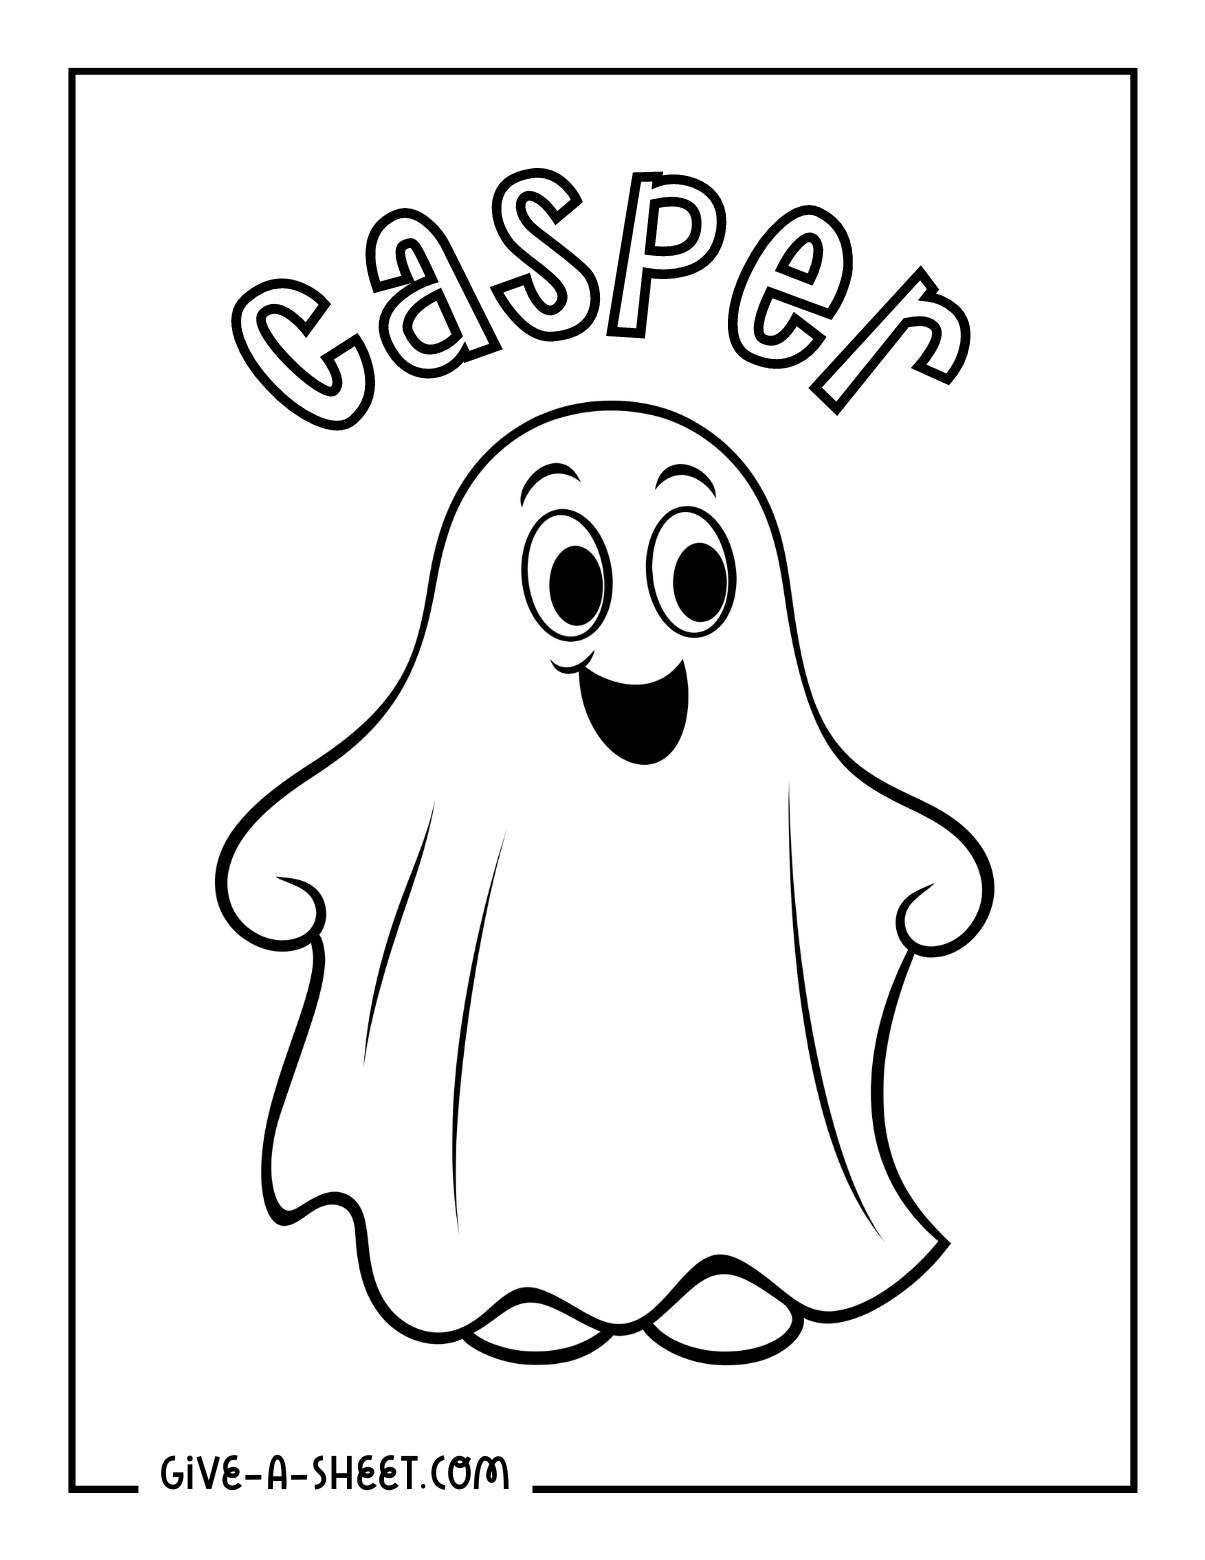 Casper the friendly ghost coloring page for kids.